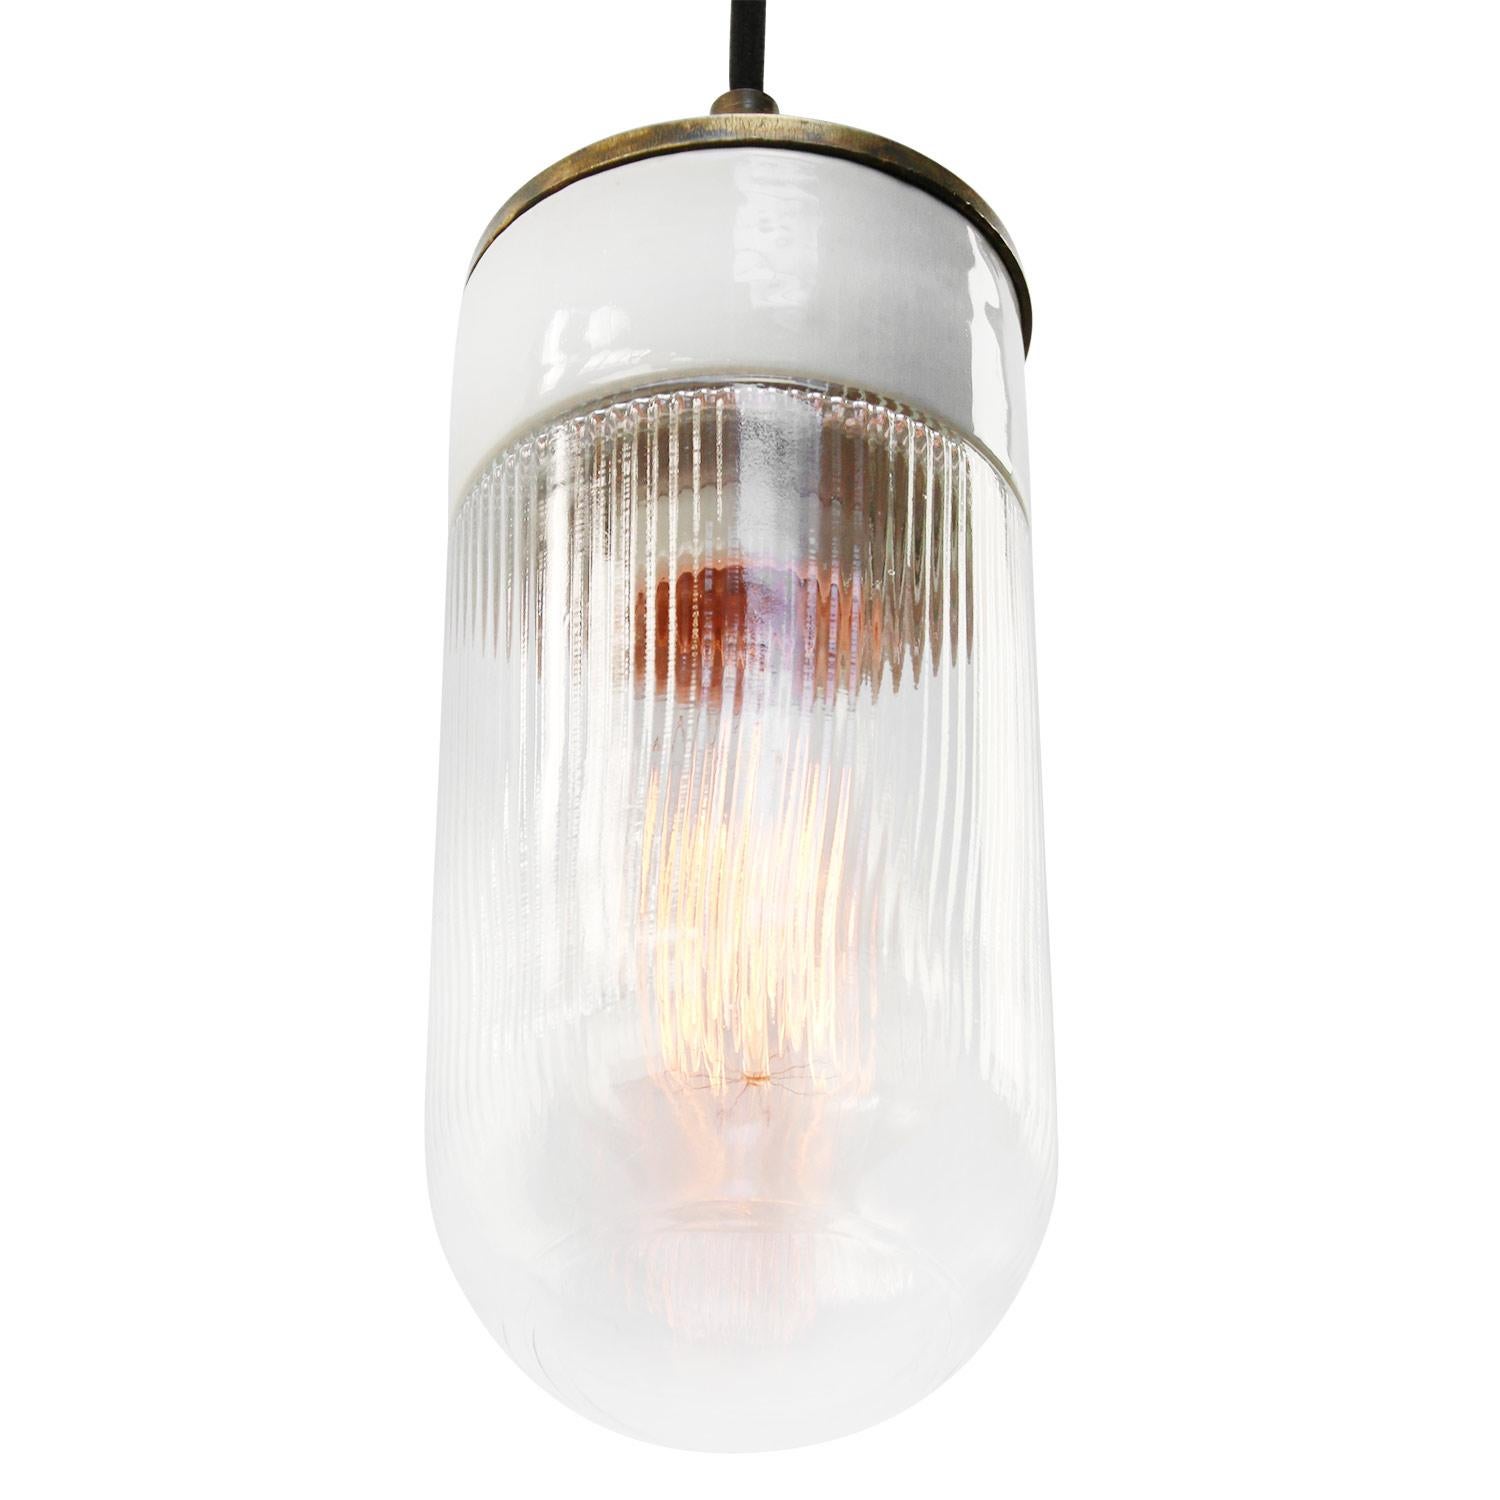 Porcelain Industrial hanging lamp.
White porcelain, brass and clear striped glass.
2 conductors, no ground.

Weight: 2.00 kg / 4.4 lb

Priced per individual item. All lamps have been made suitable by international standards for incandescent